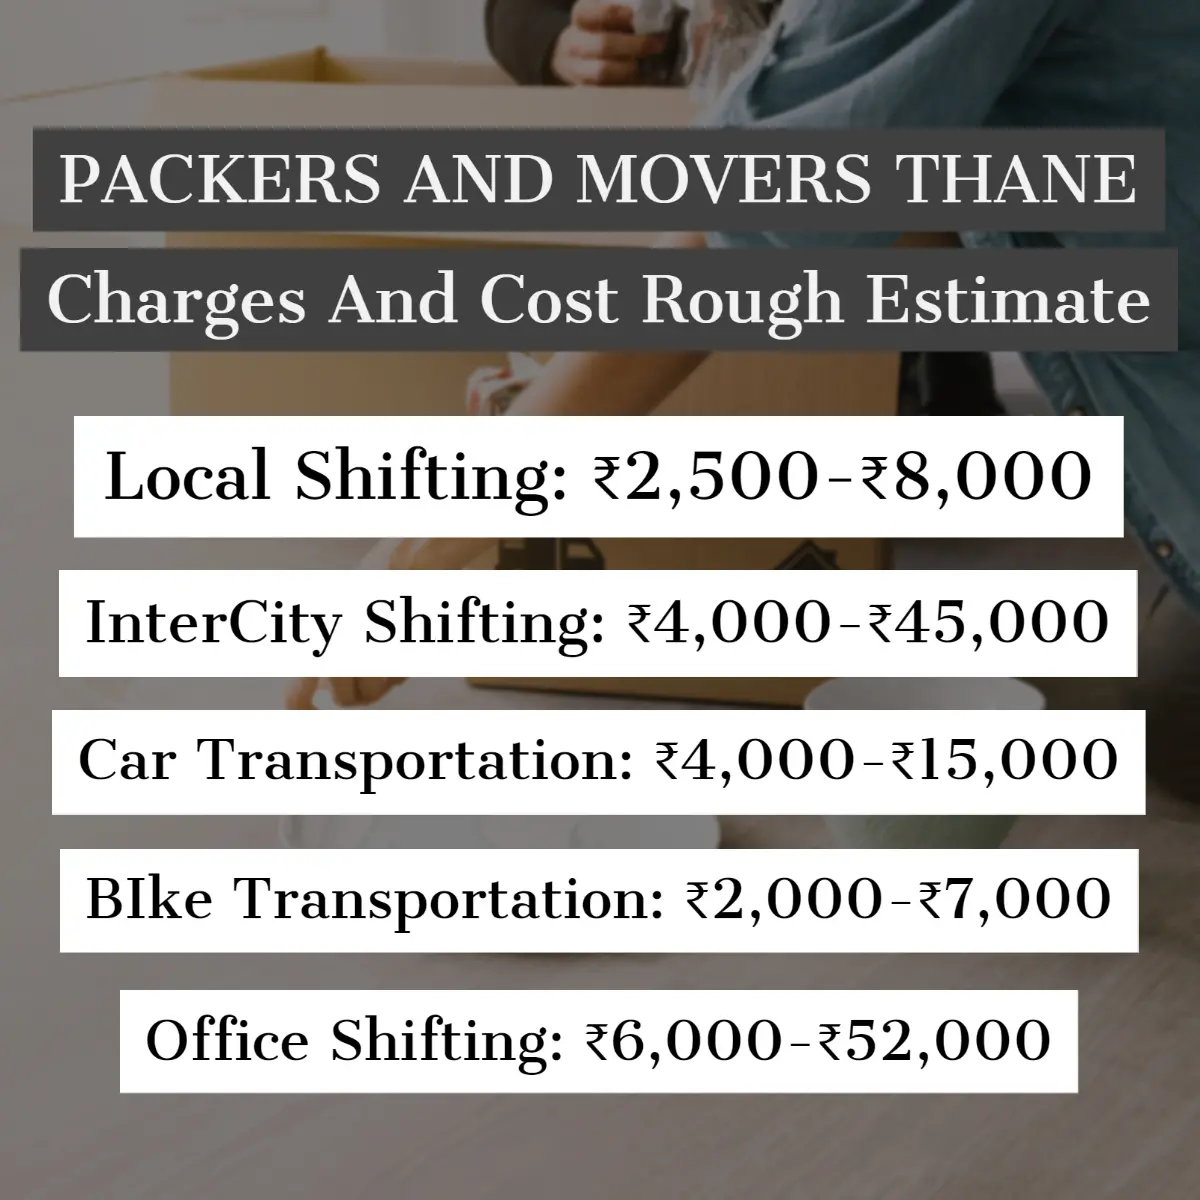 Packers and Movers Thane Charges